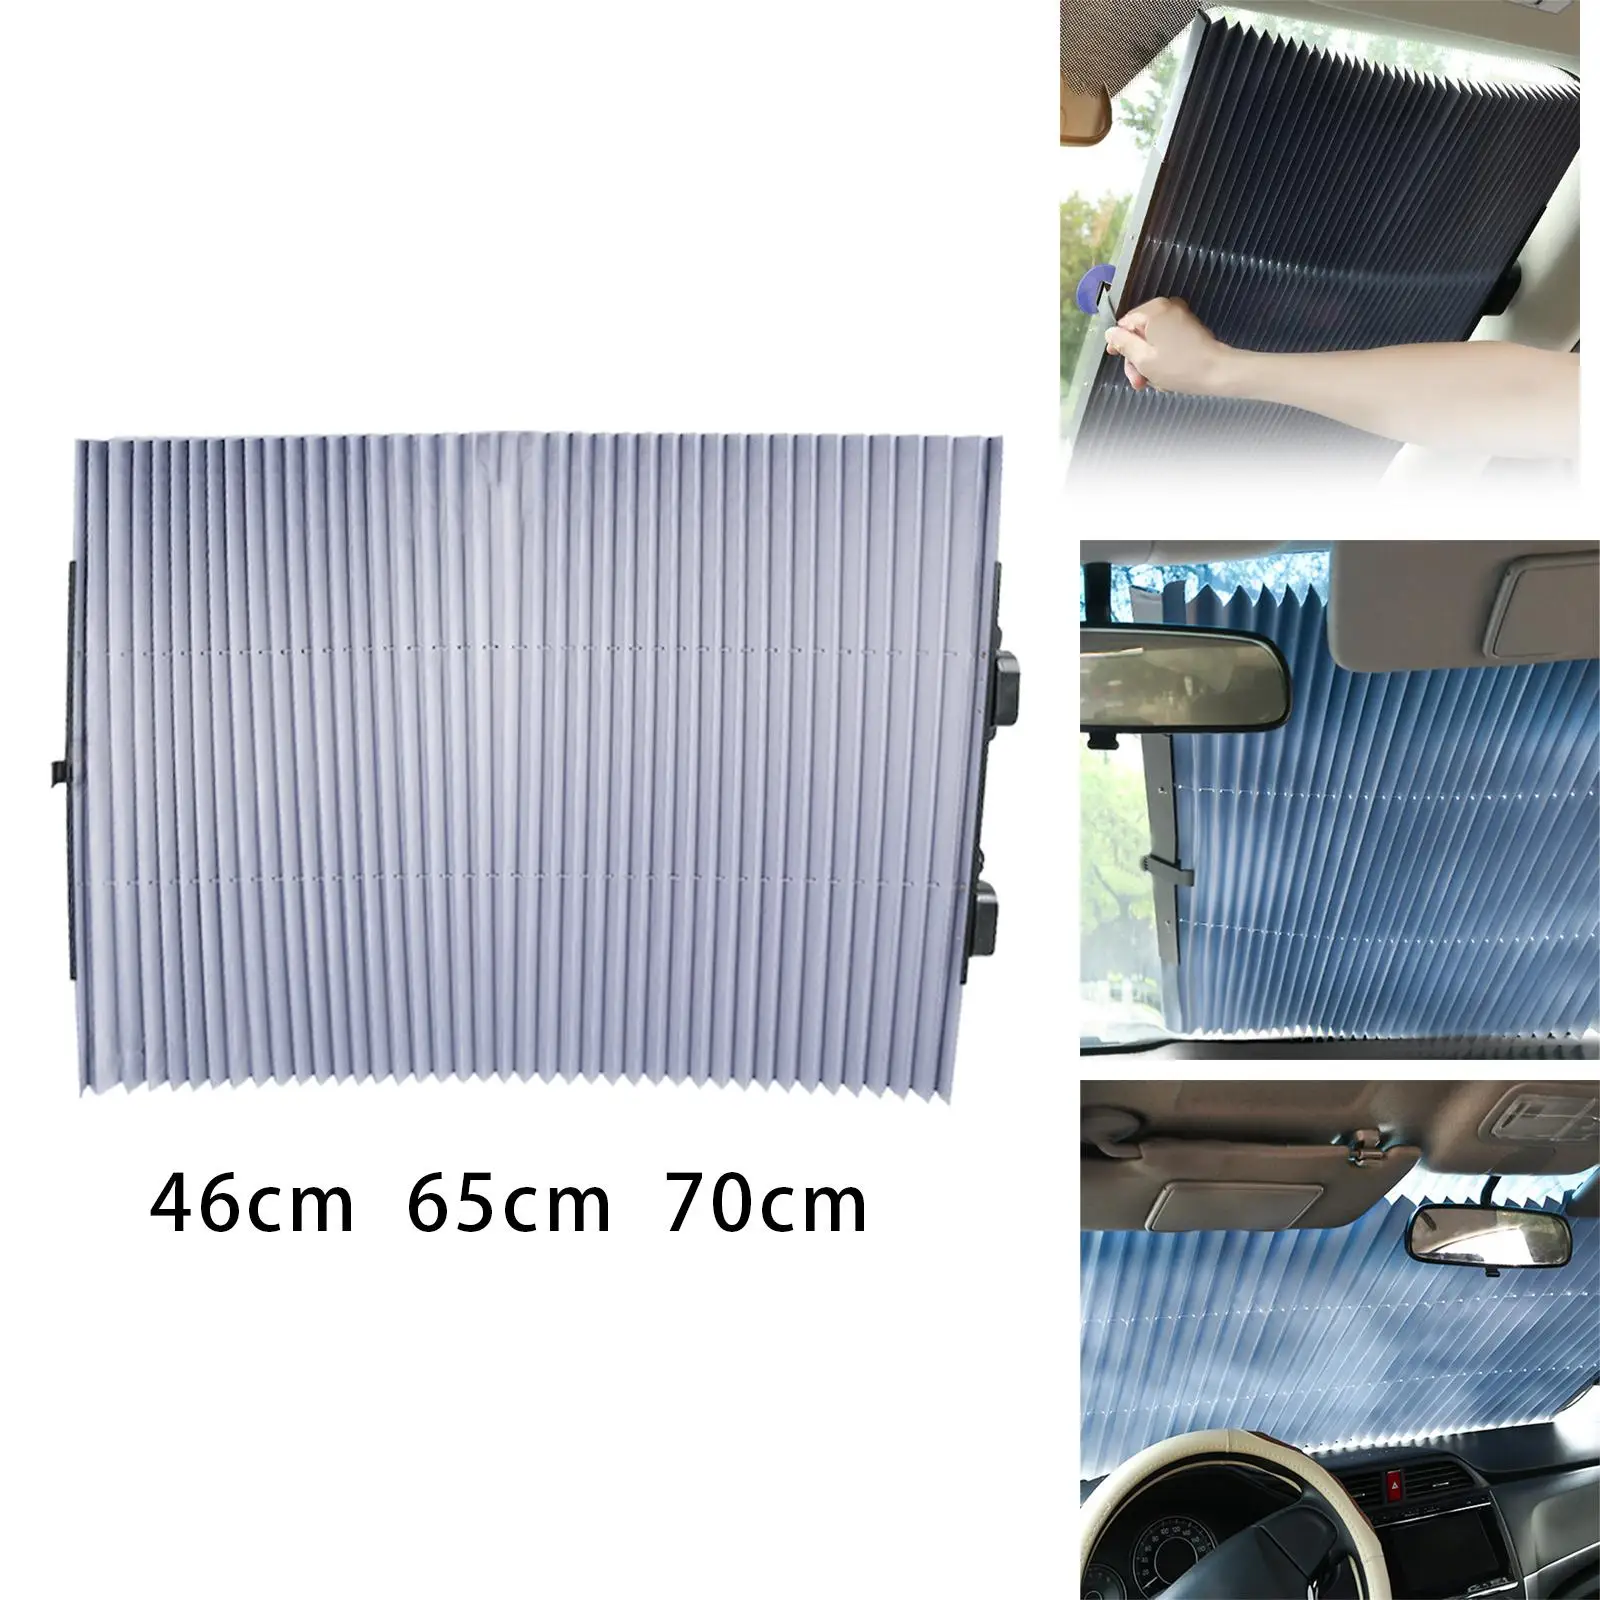 Windshield Sunshade Double Suction Cups Sunshade Curtains Fit for All Cars